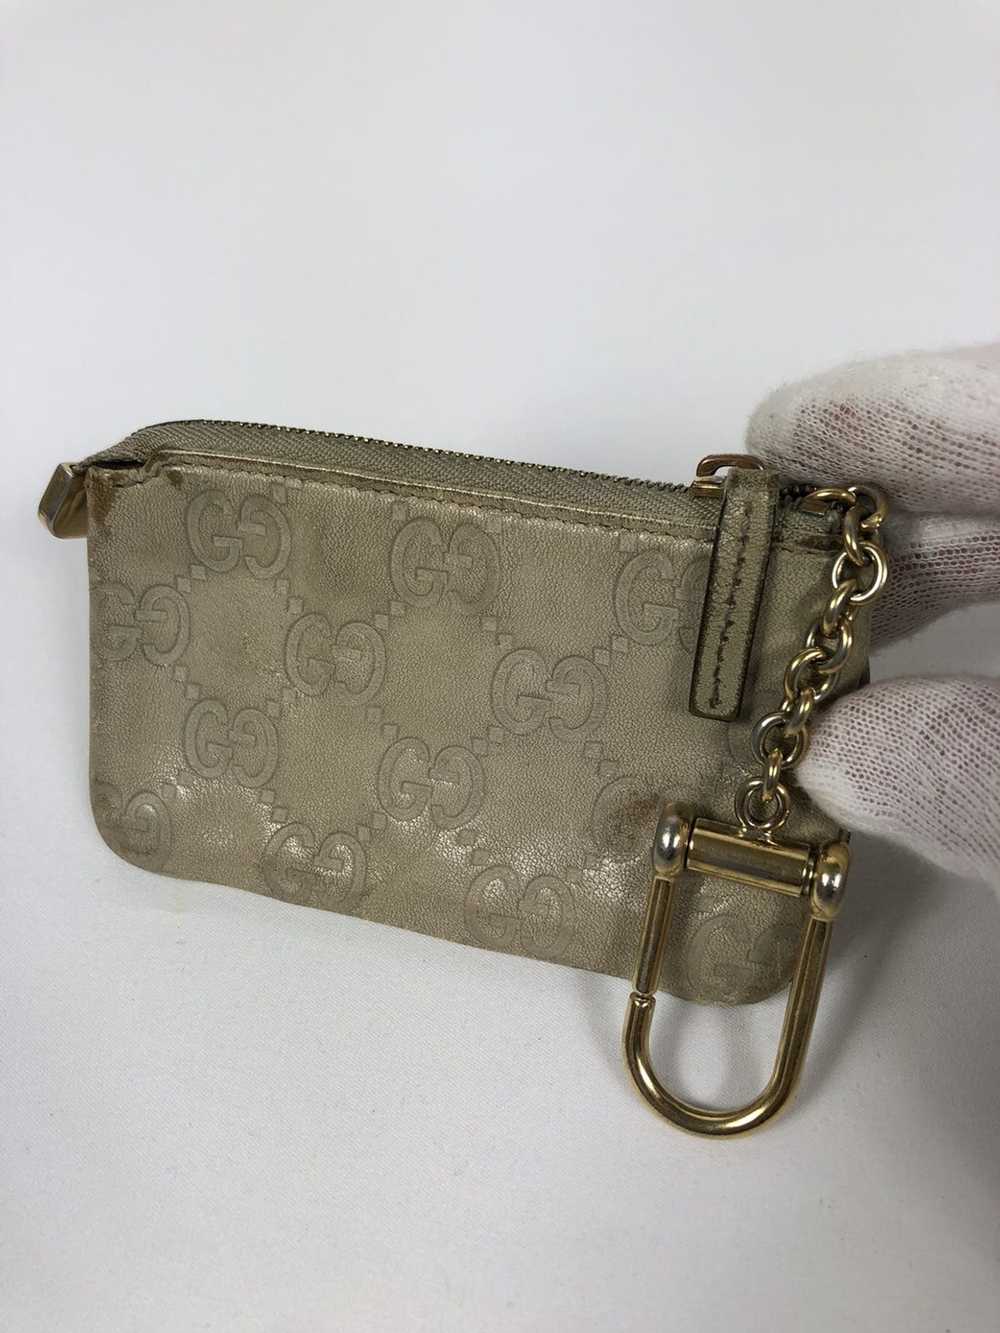 Gucci Gucci gg guccissima leather cles wallet - image 2